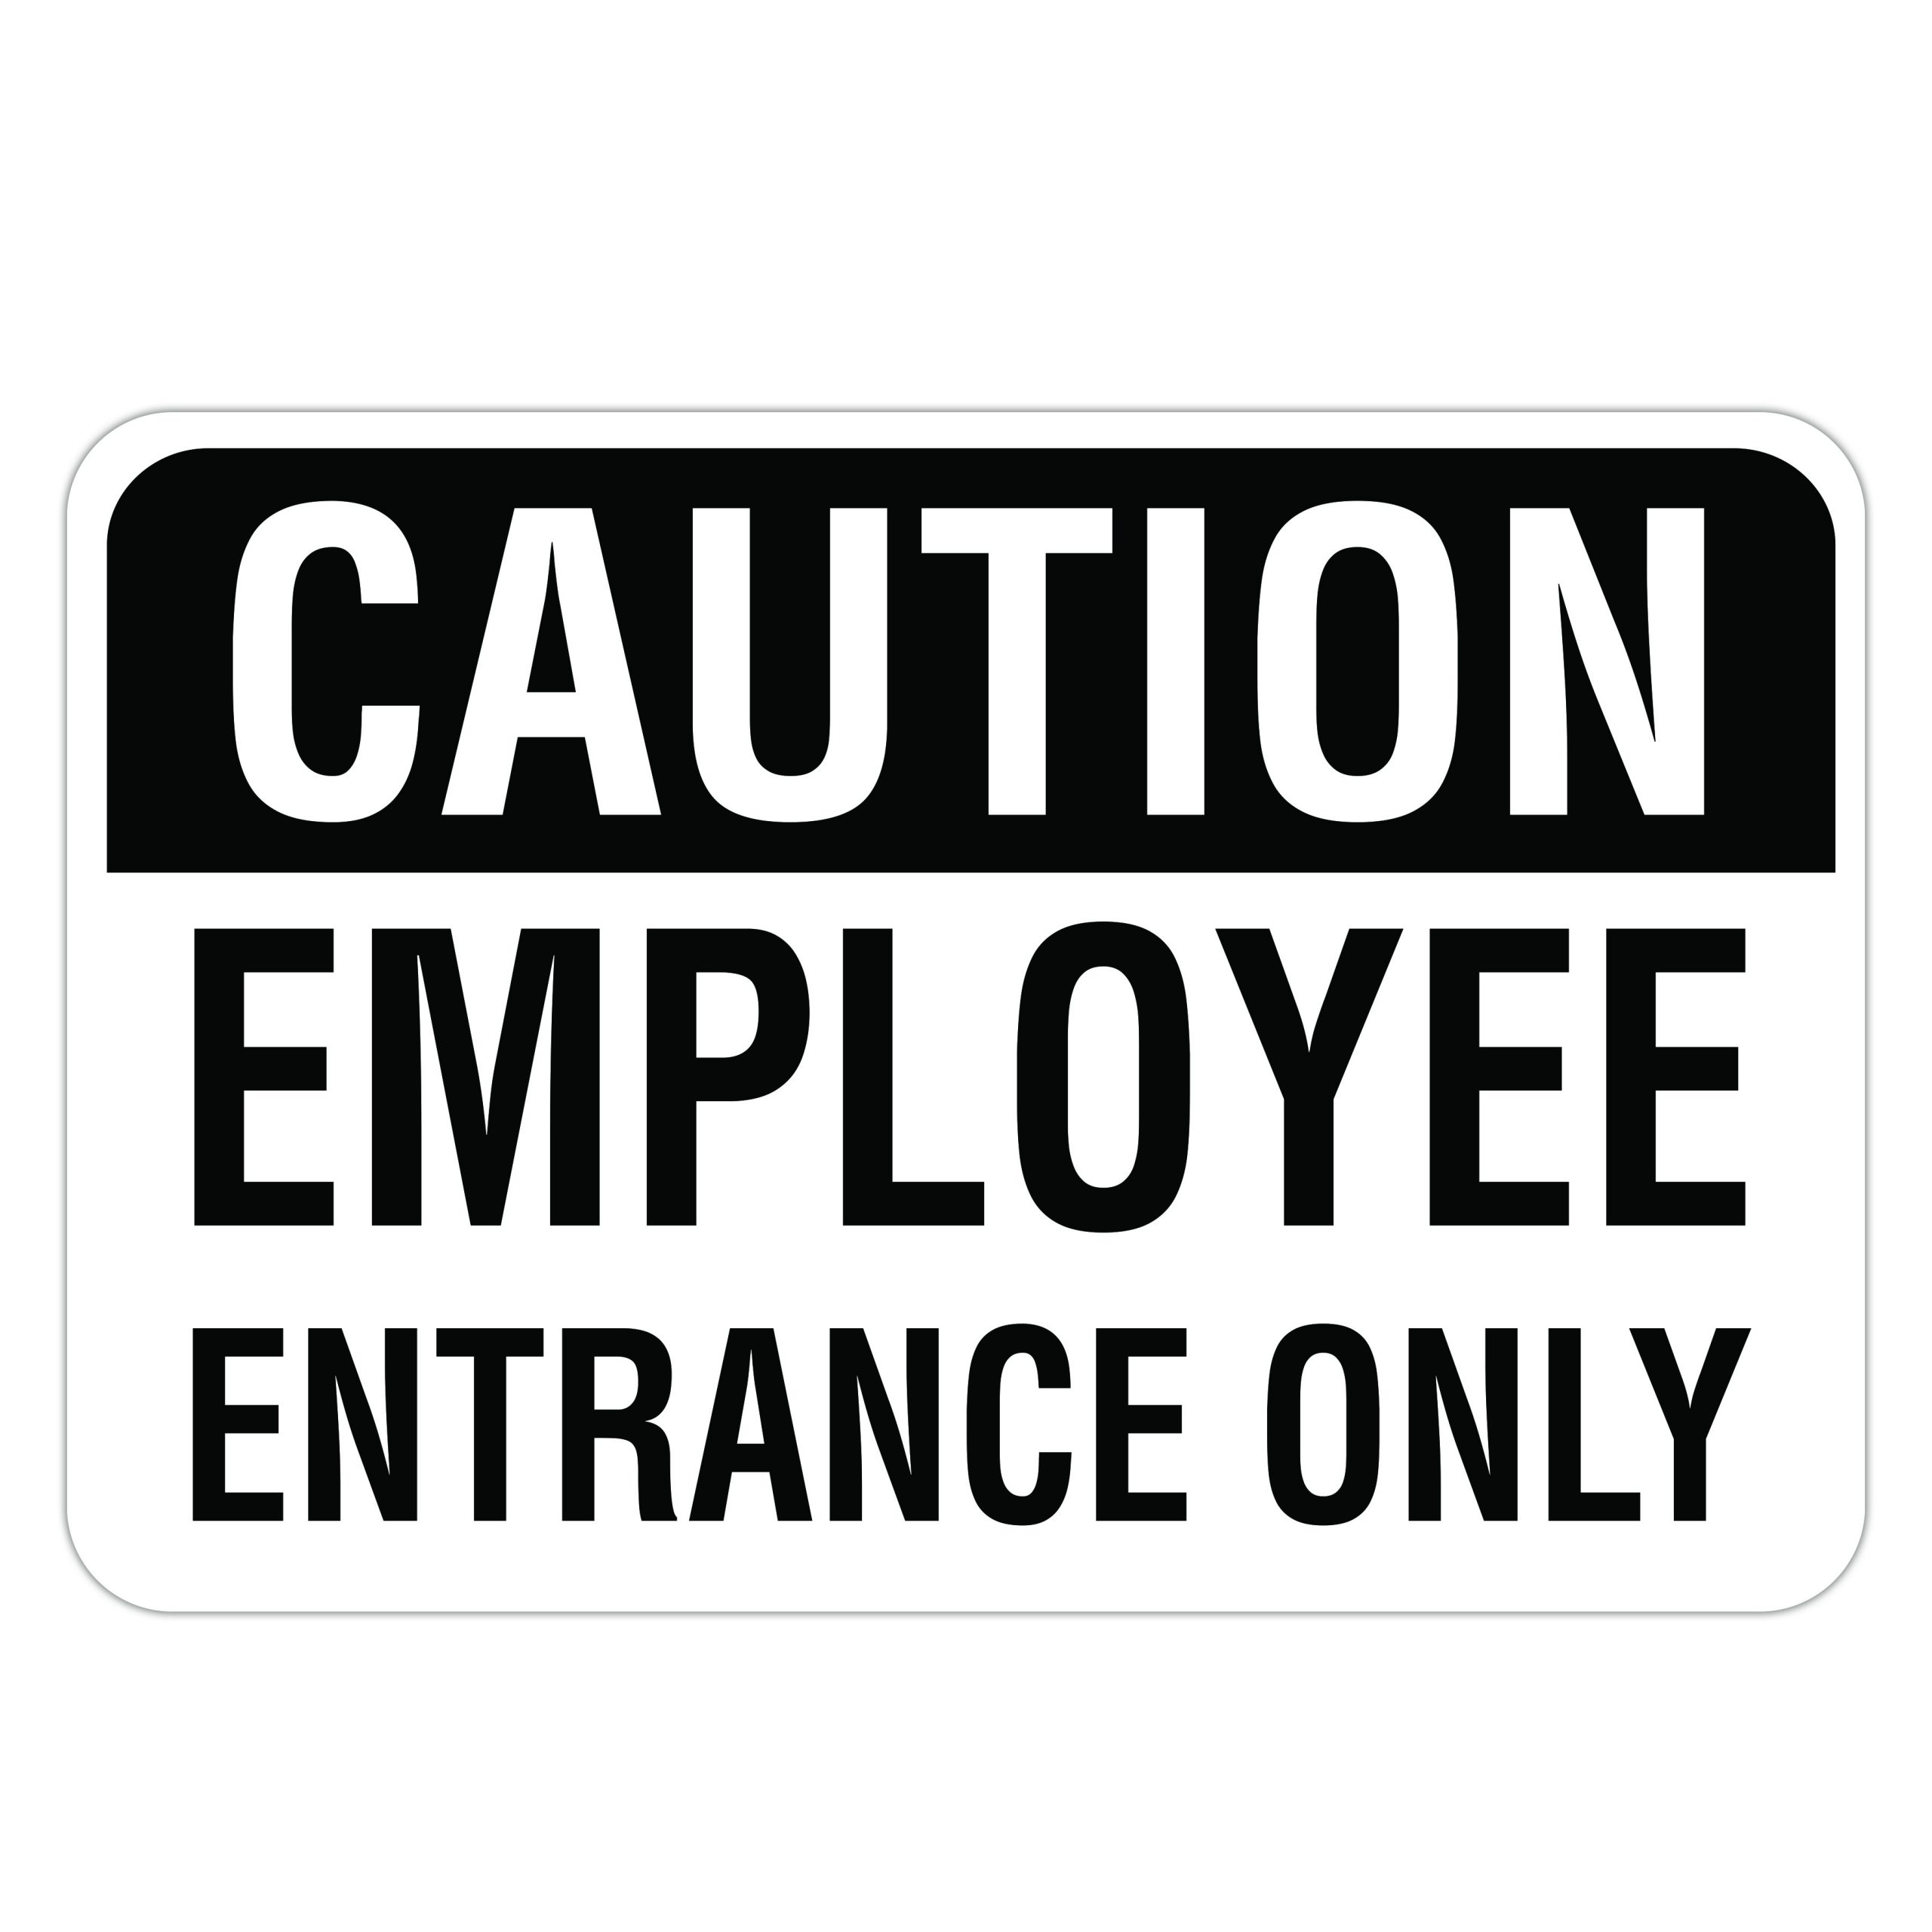 caution-employee-entrance-only-american-sign-company